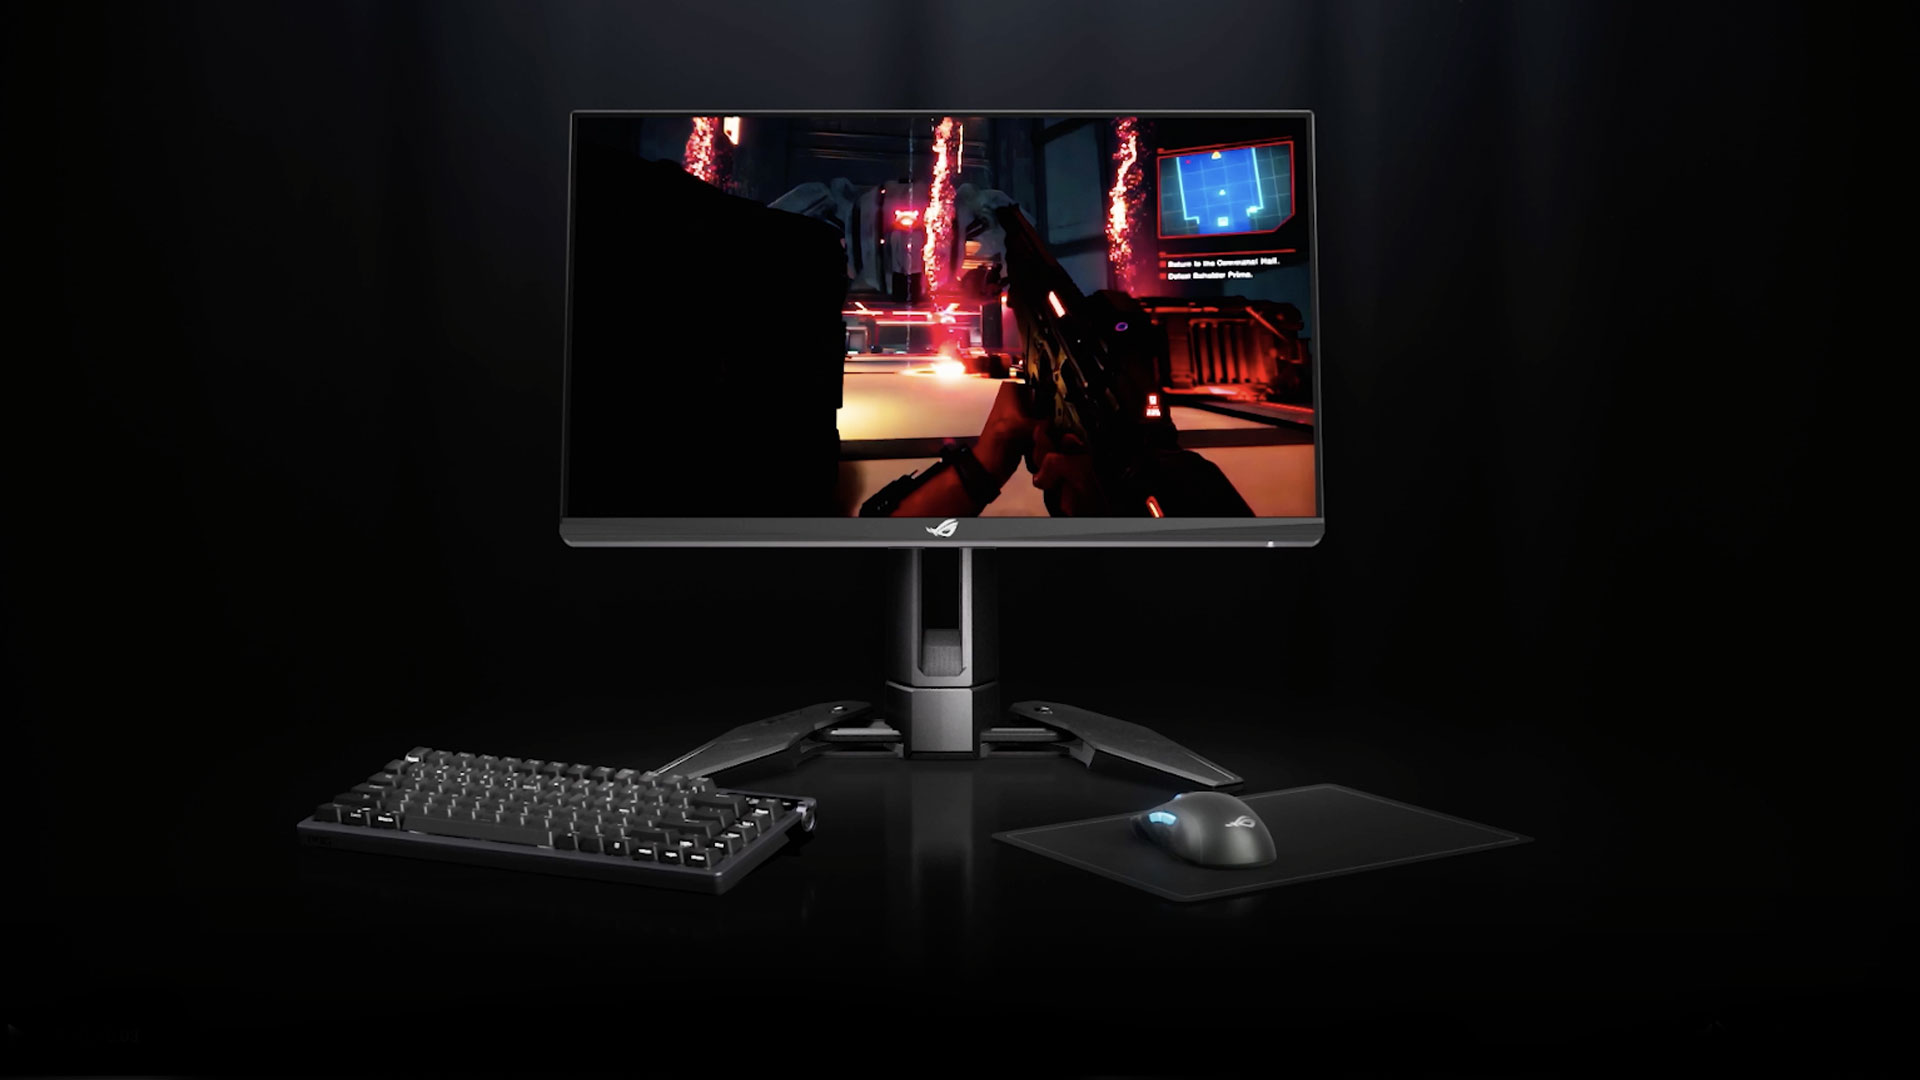 The ROG Swift Pro PG248QP blazes a 540Hz trail for next-level pro gaming